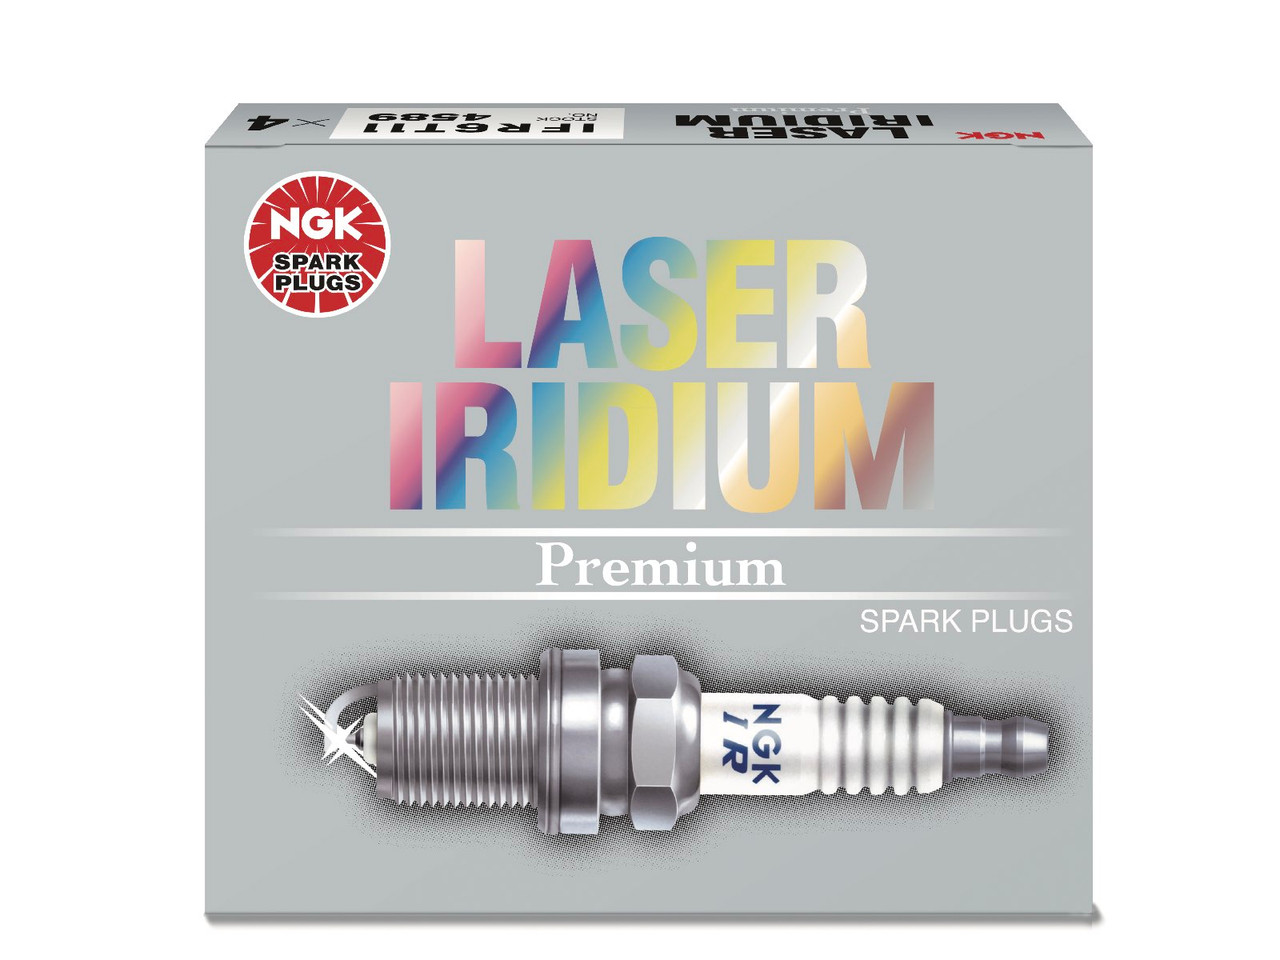 https://cdn11.bigcommerce.com/s-351ed/images/stencil/{:size}/products/24668/104652/spark_plugs_for_mini_countryman_r60_ngk_laser_iridium_3JD19LY_24668__68745.1681421118.jpg?c=2